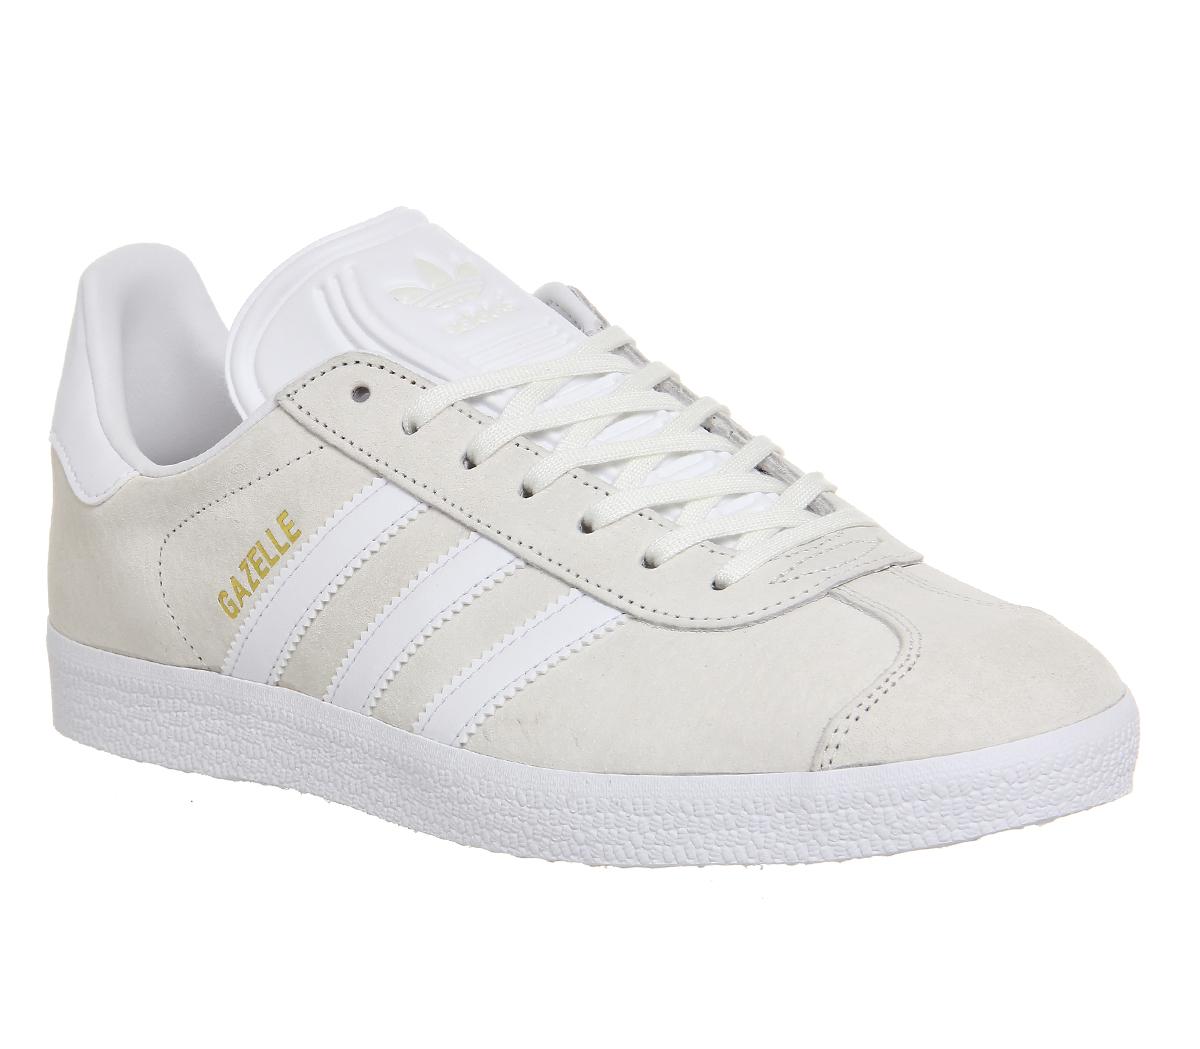 adidas Gazelle Off White - His trainers